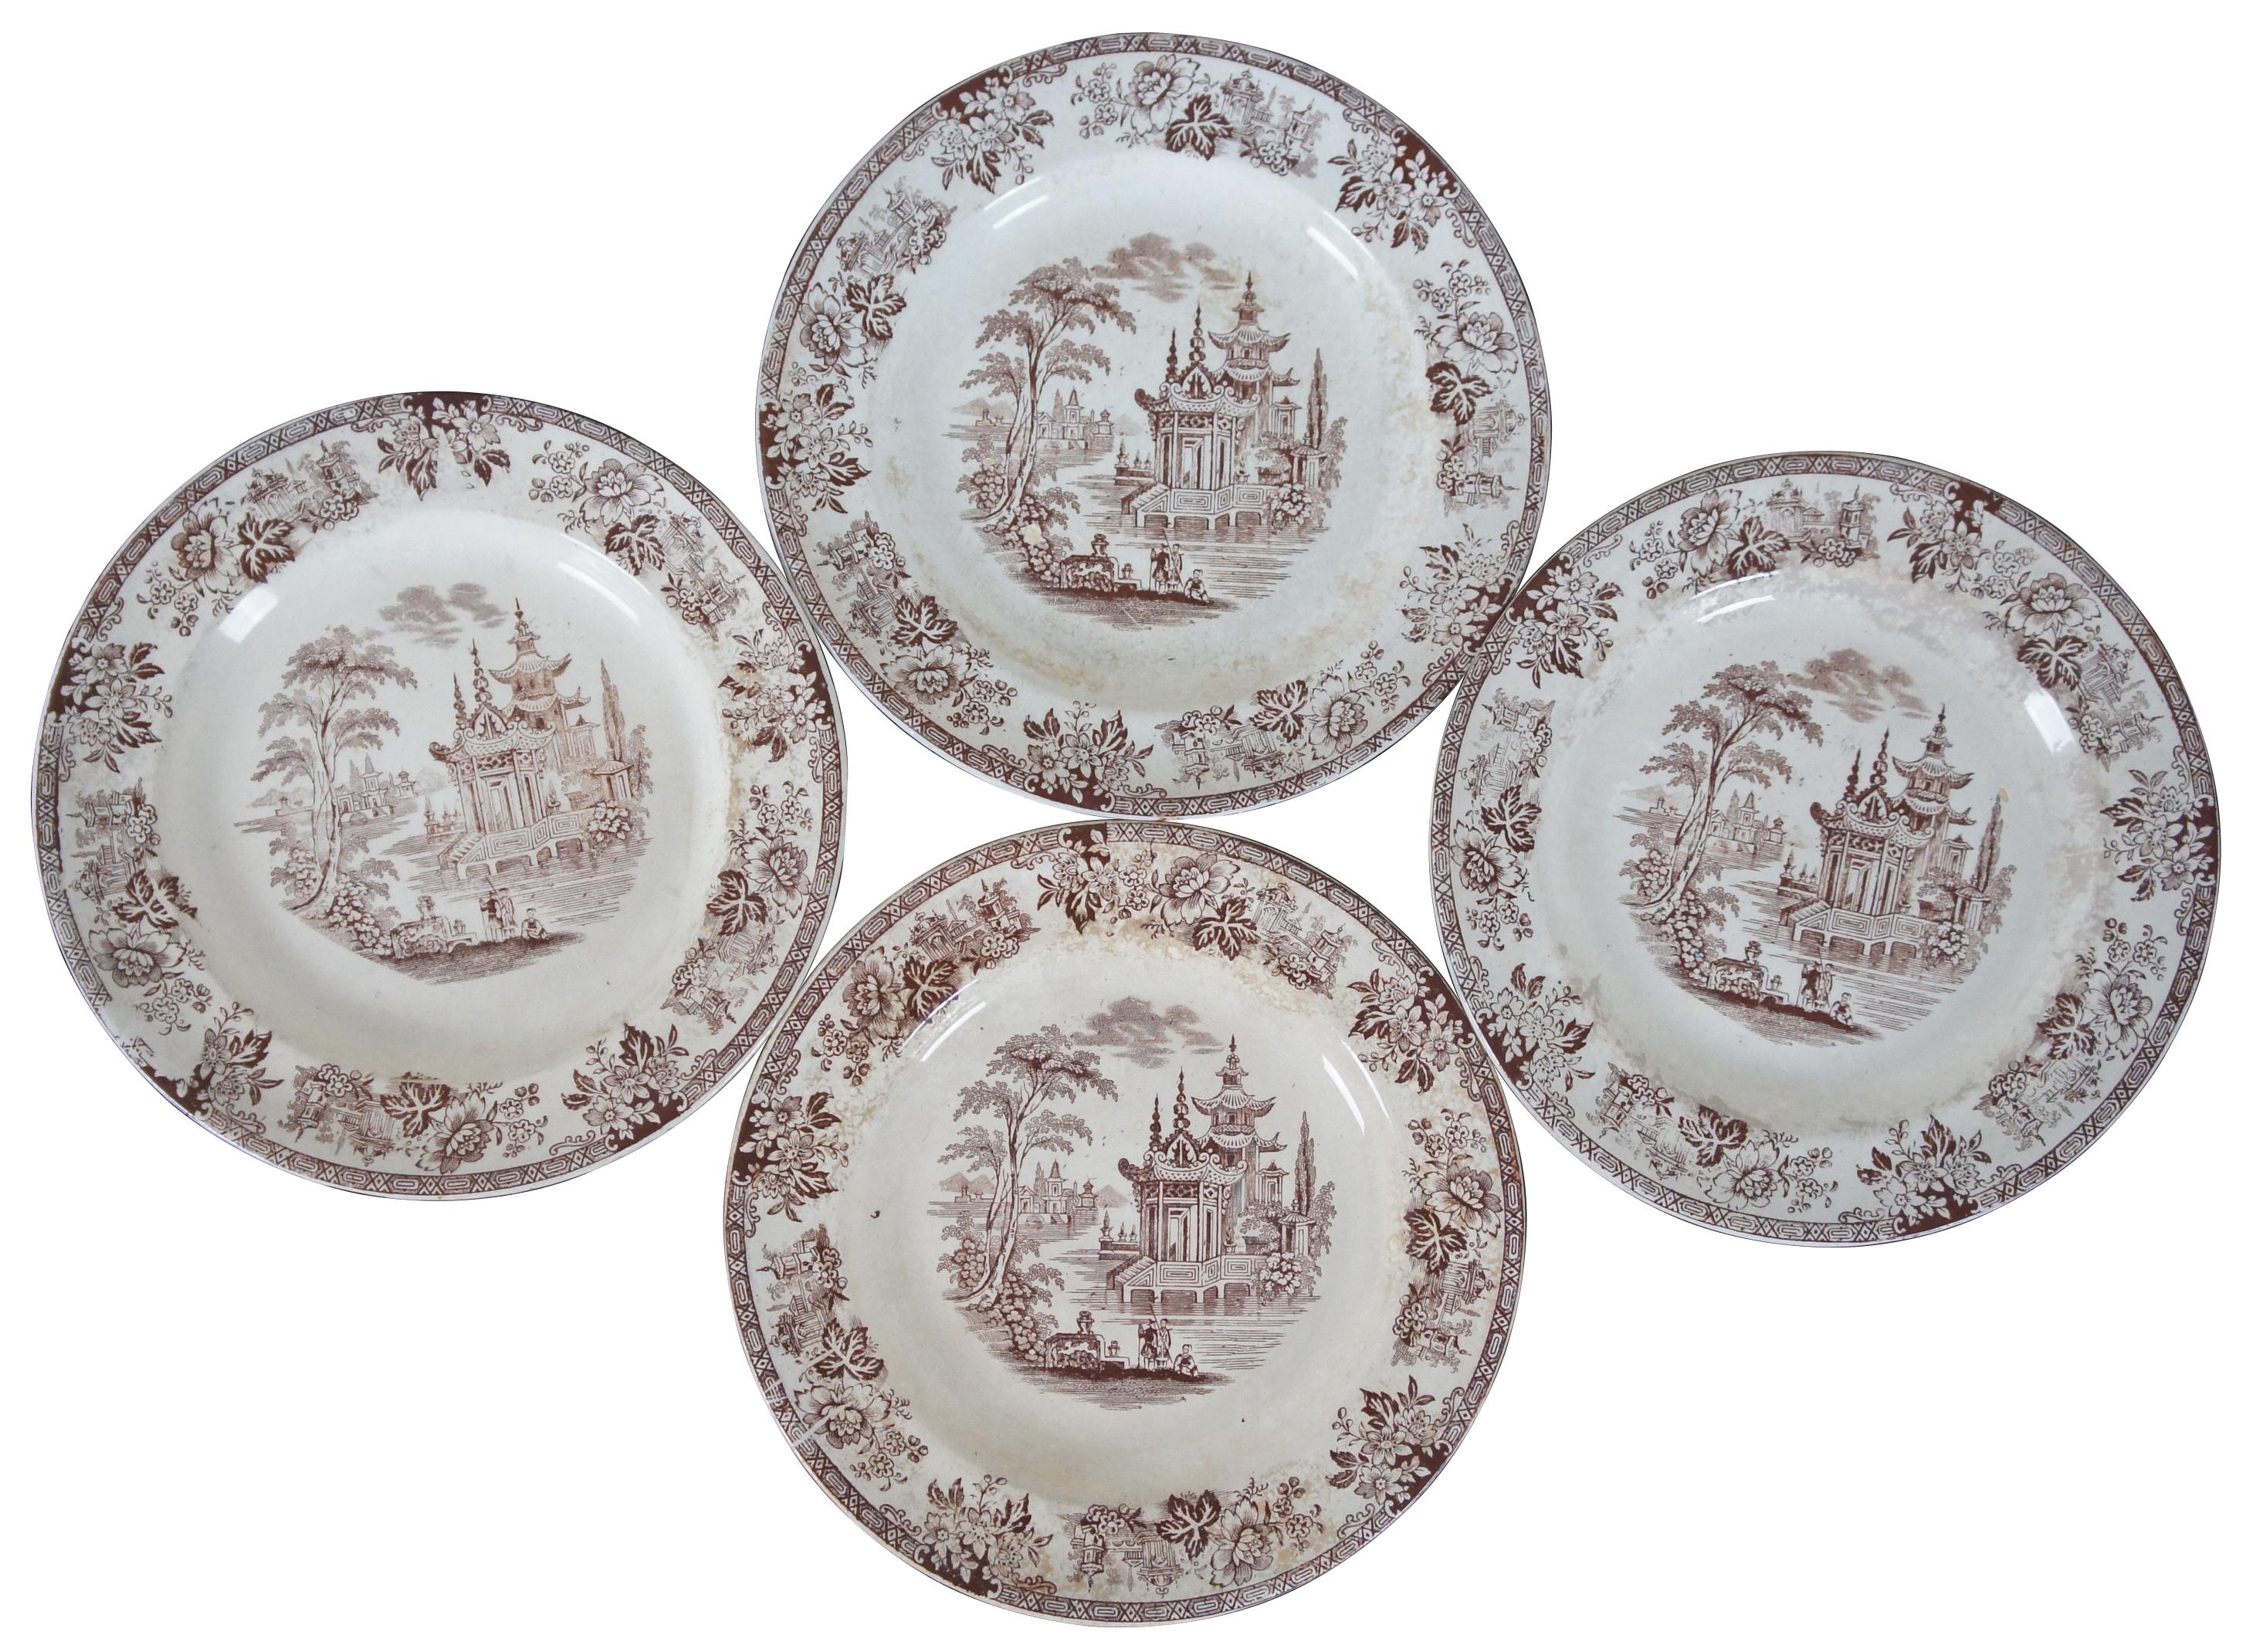 Set of four William Brownfield ironstone brown transferware plates in the Madras pattern. Measure: 8